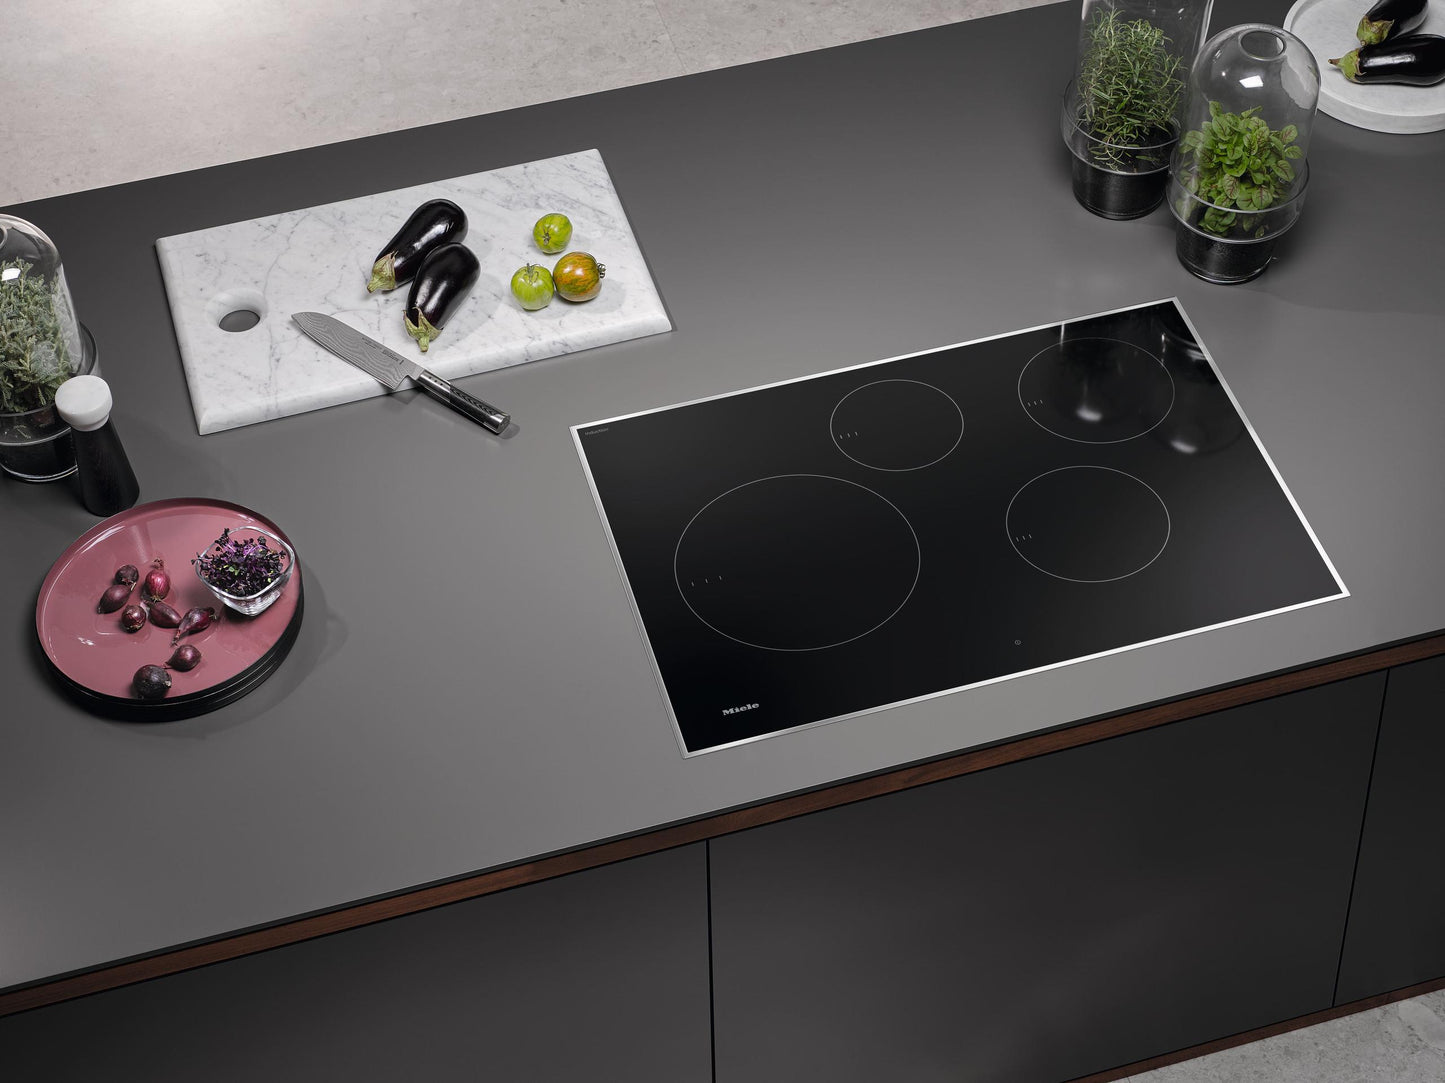 Miele KM7730FR Km 7730 Fr - Induction Cooktop With 4 Round Cooking Zones